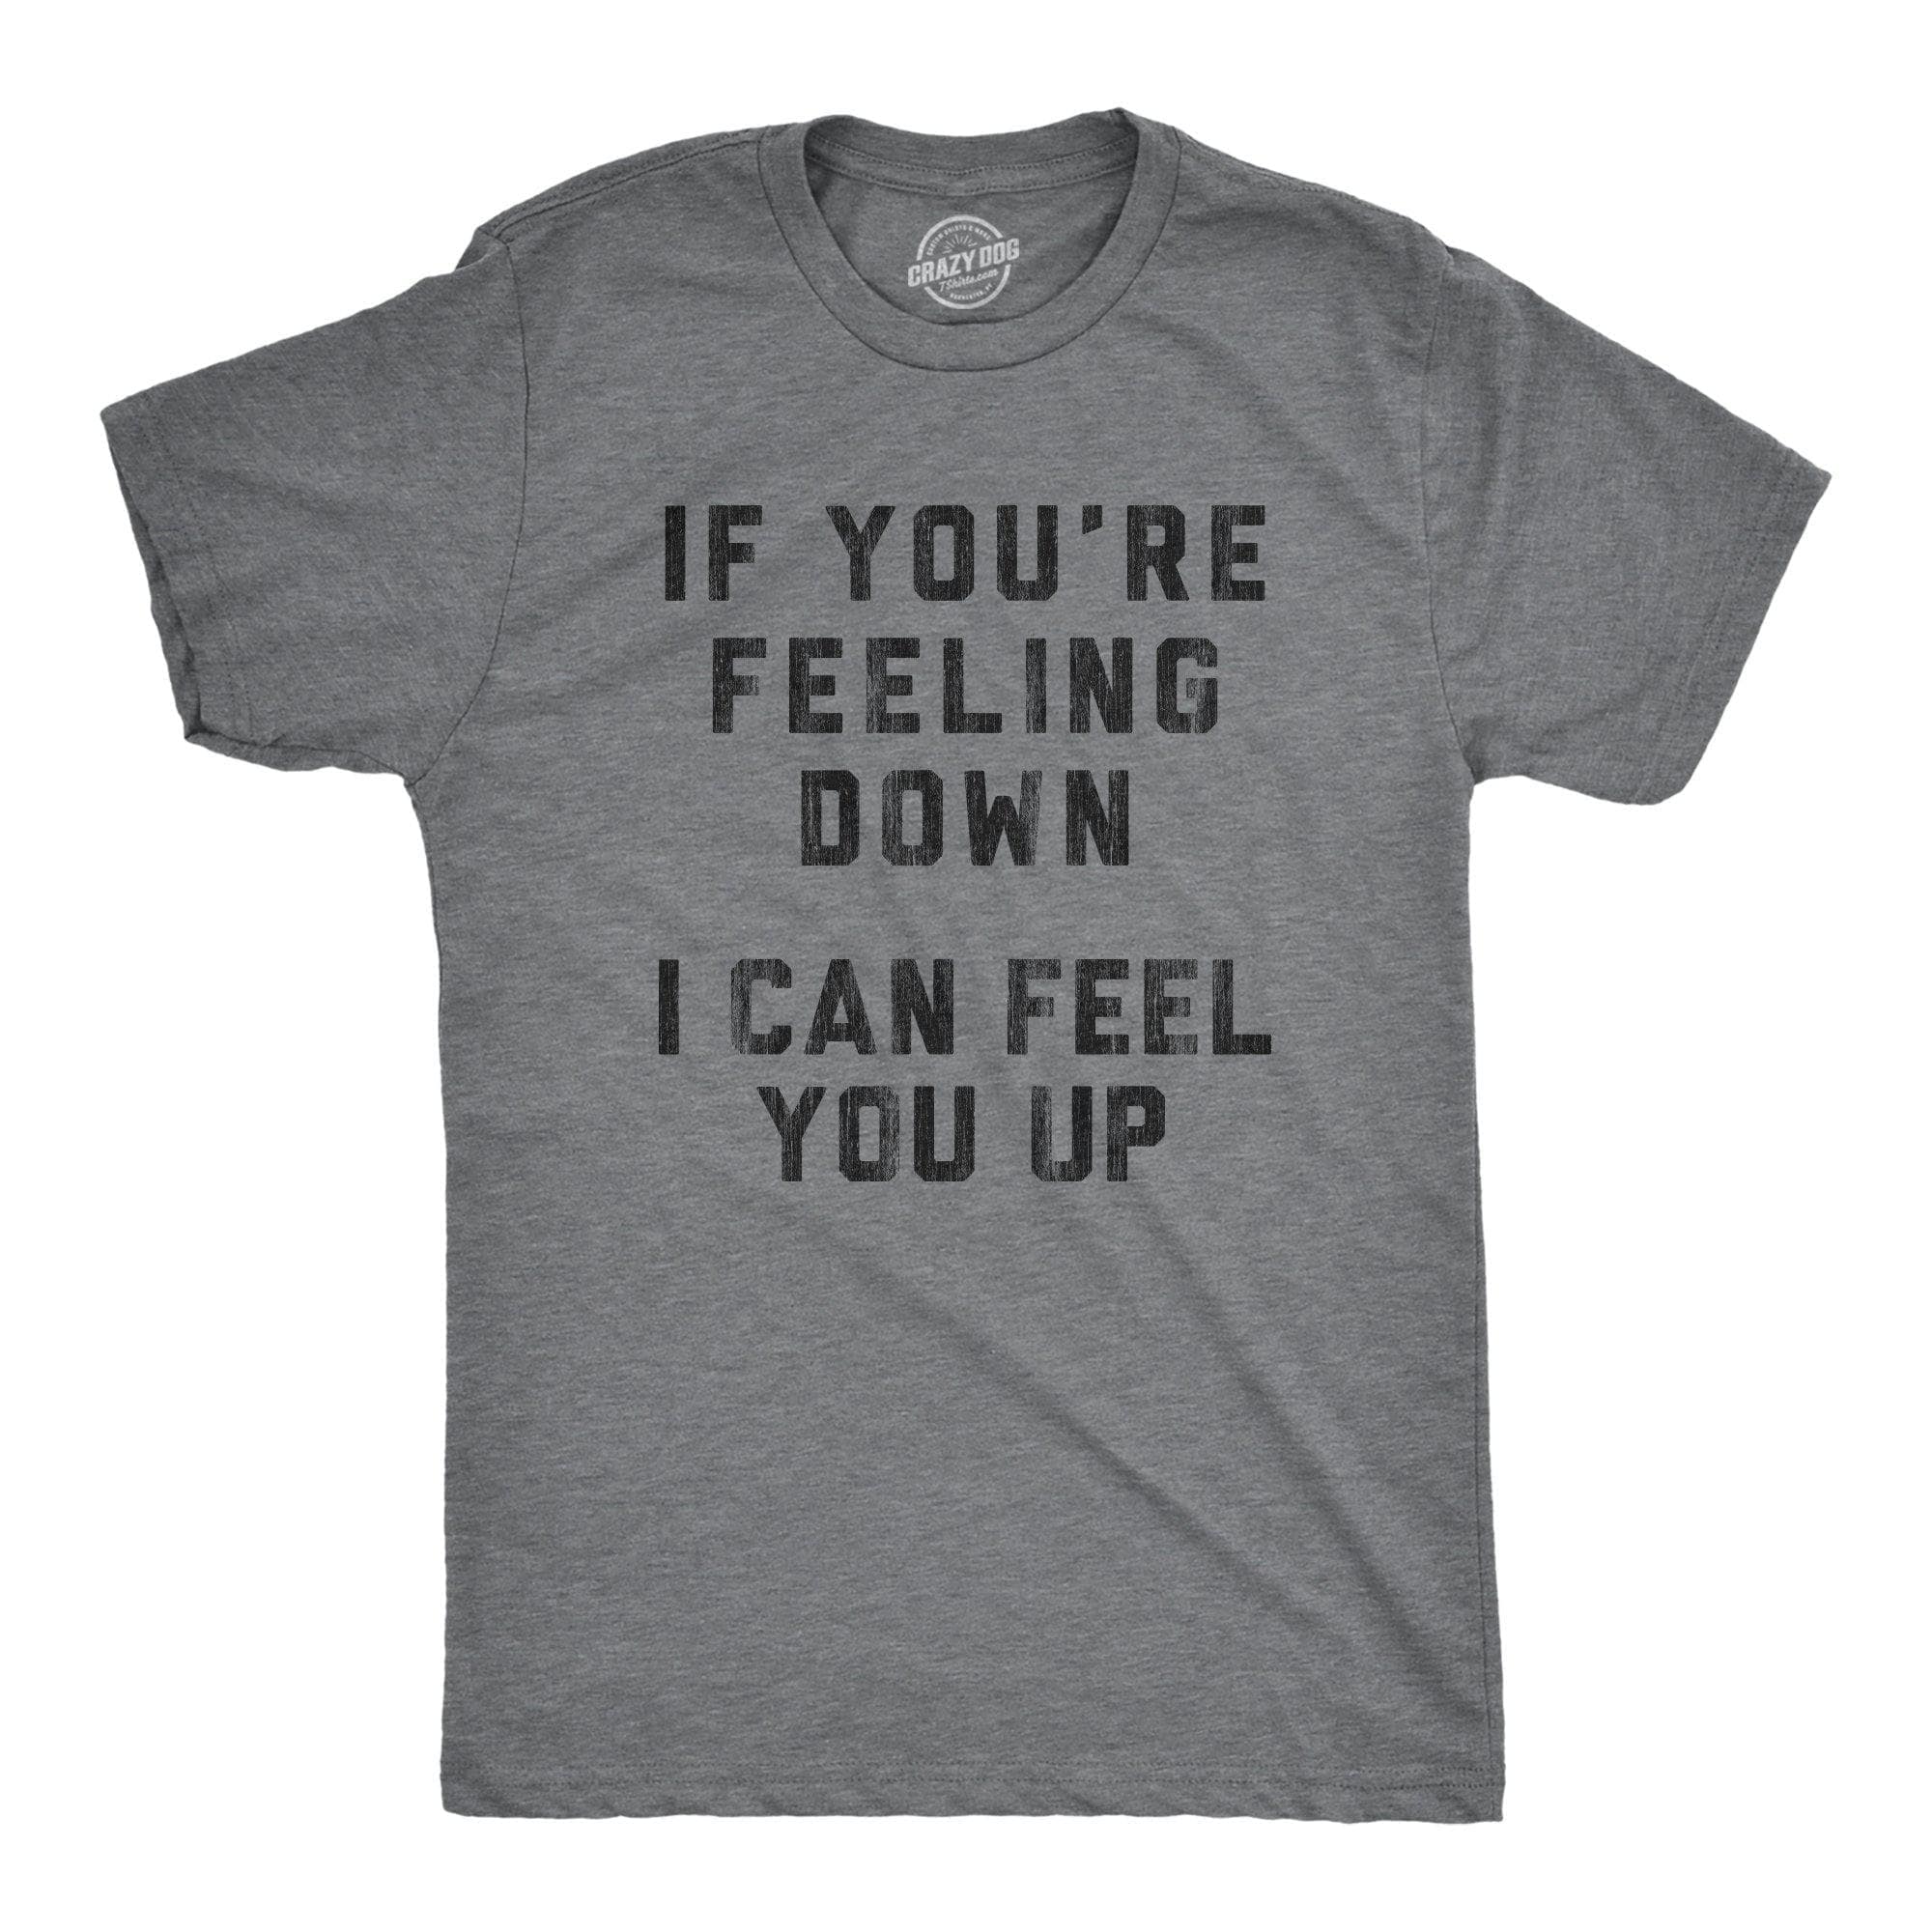 If You're Feeling Down I Can Feel You Up Men's Tshirt - Crazy Dog T-Shirts